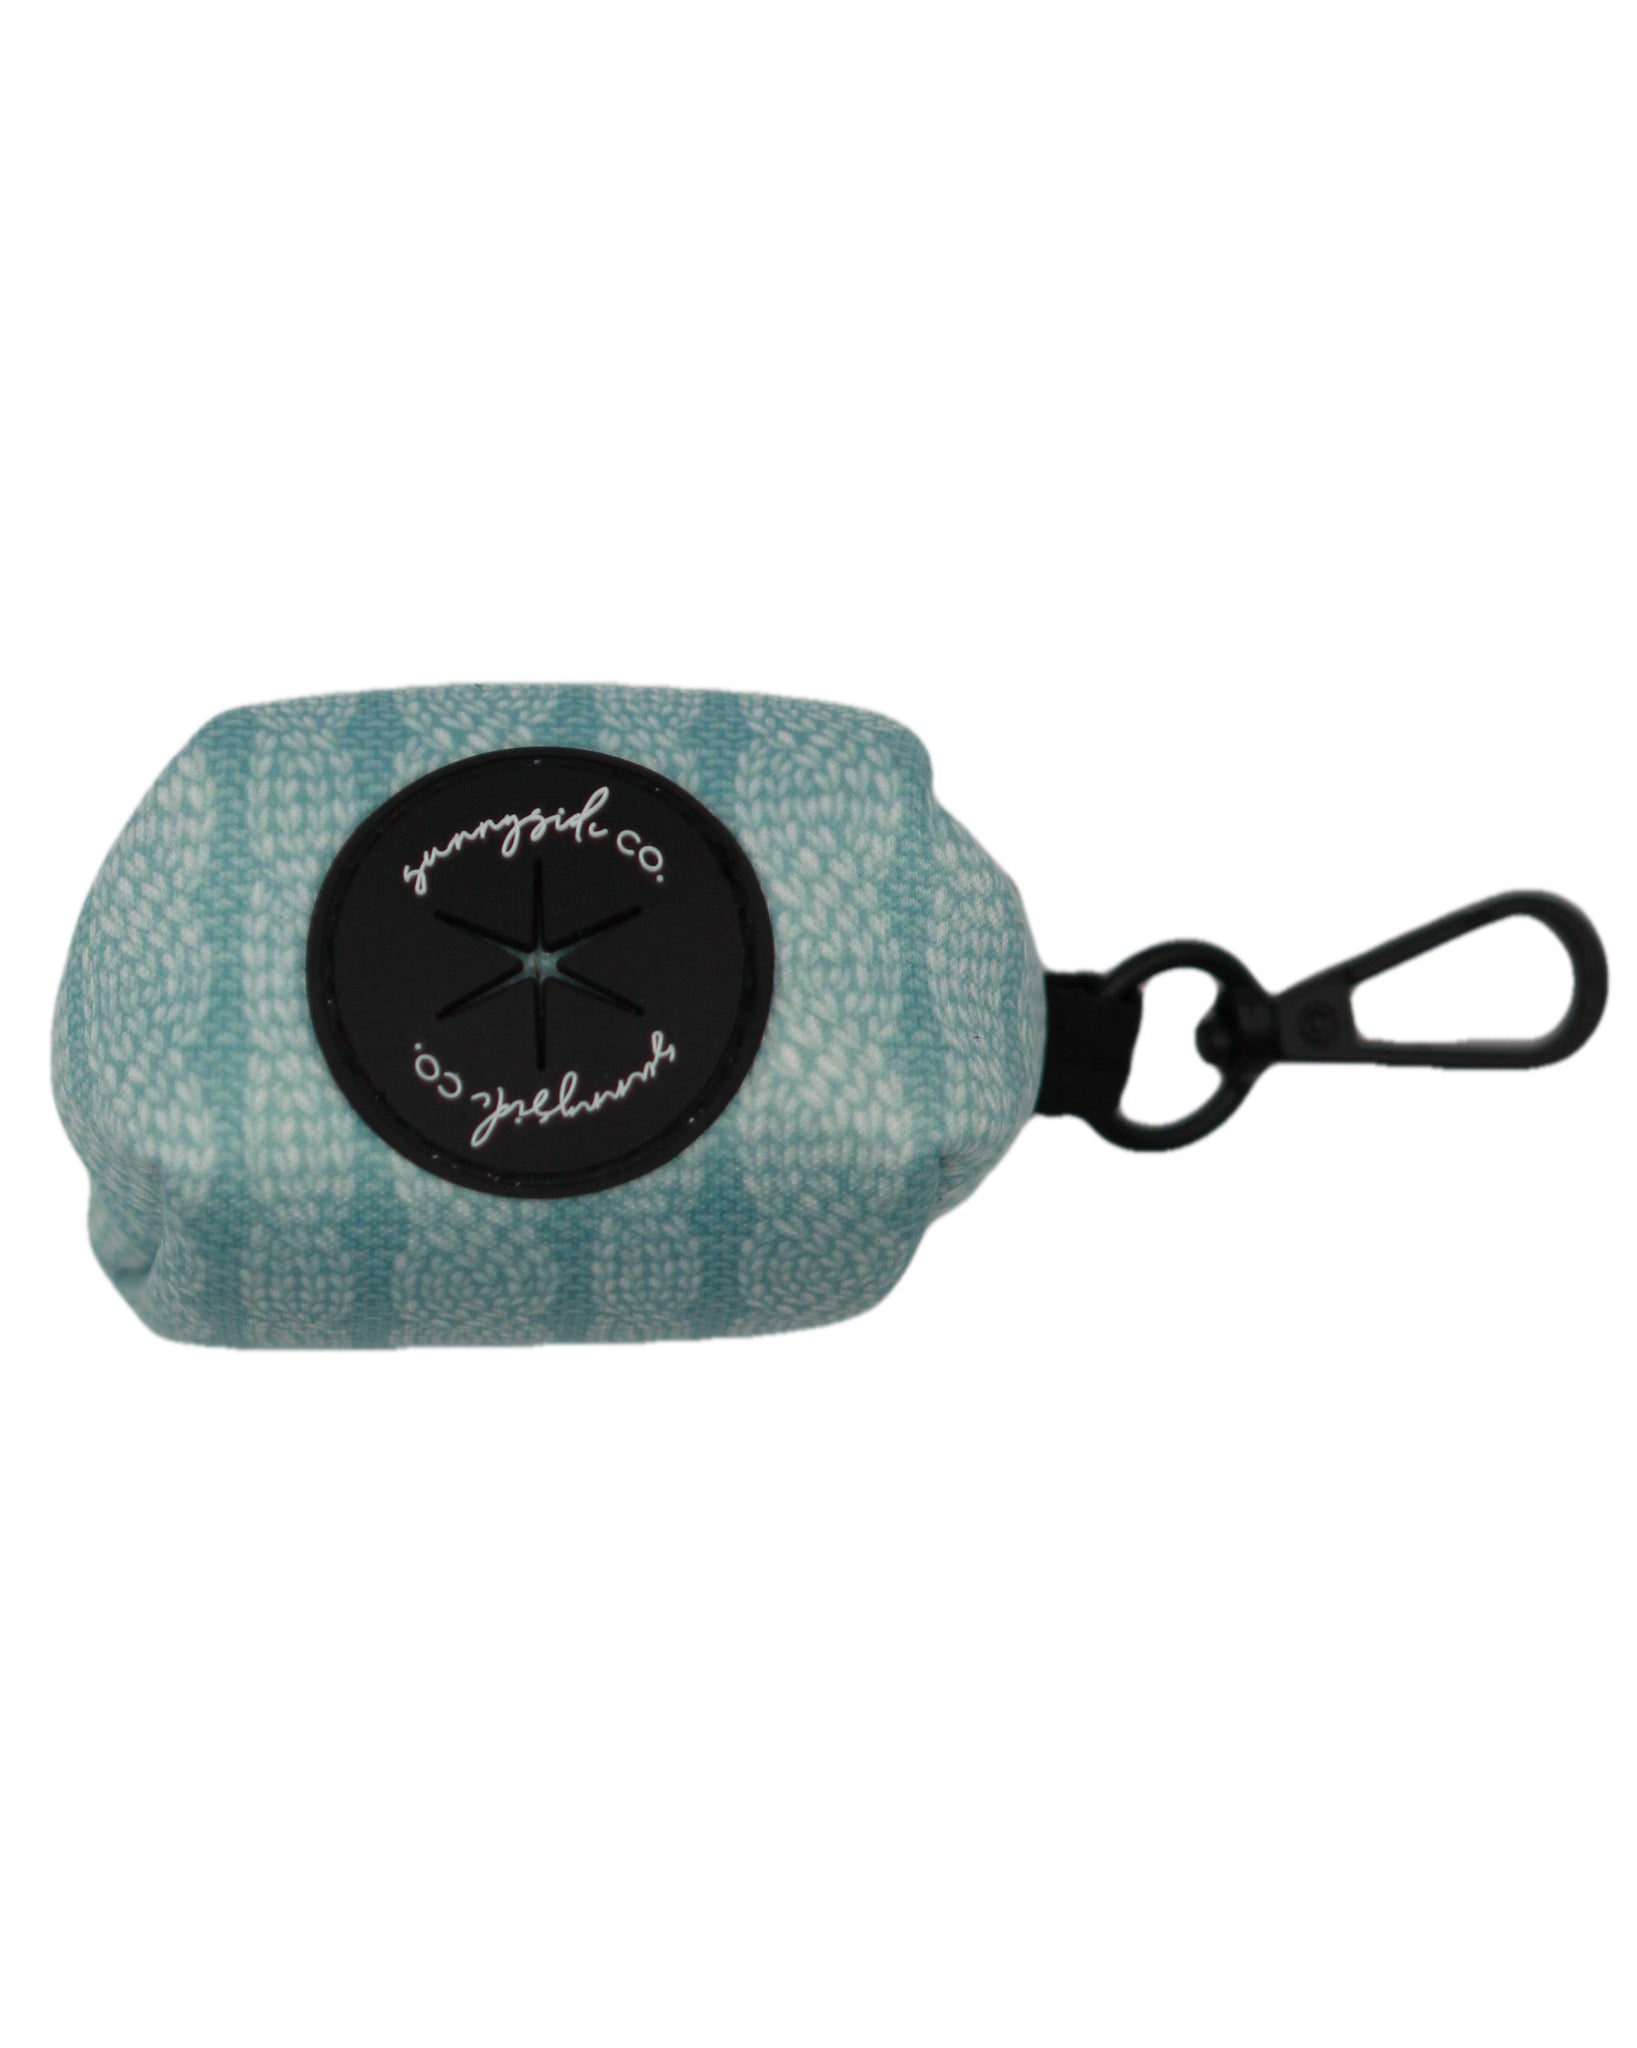 Poo Bag Holder - Stitched with Love - ICE BLUE